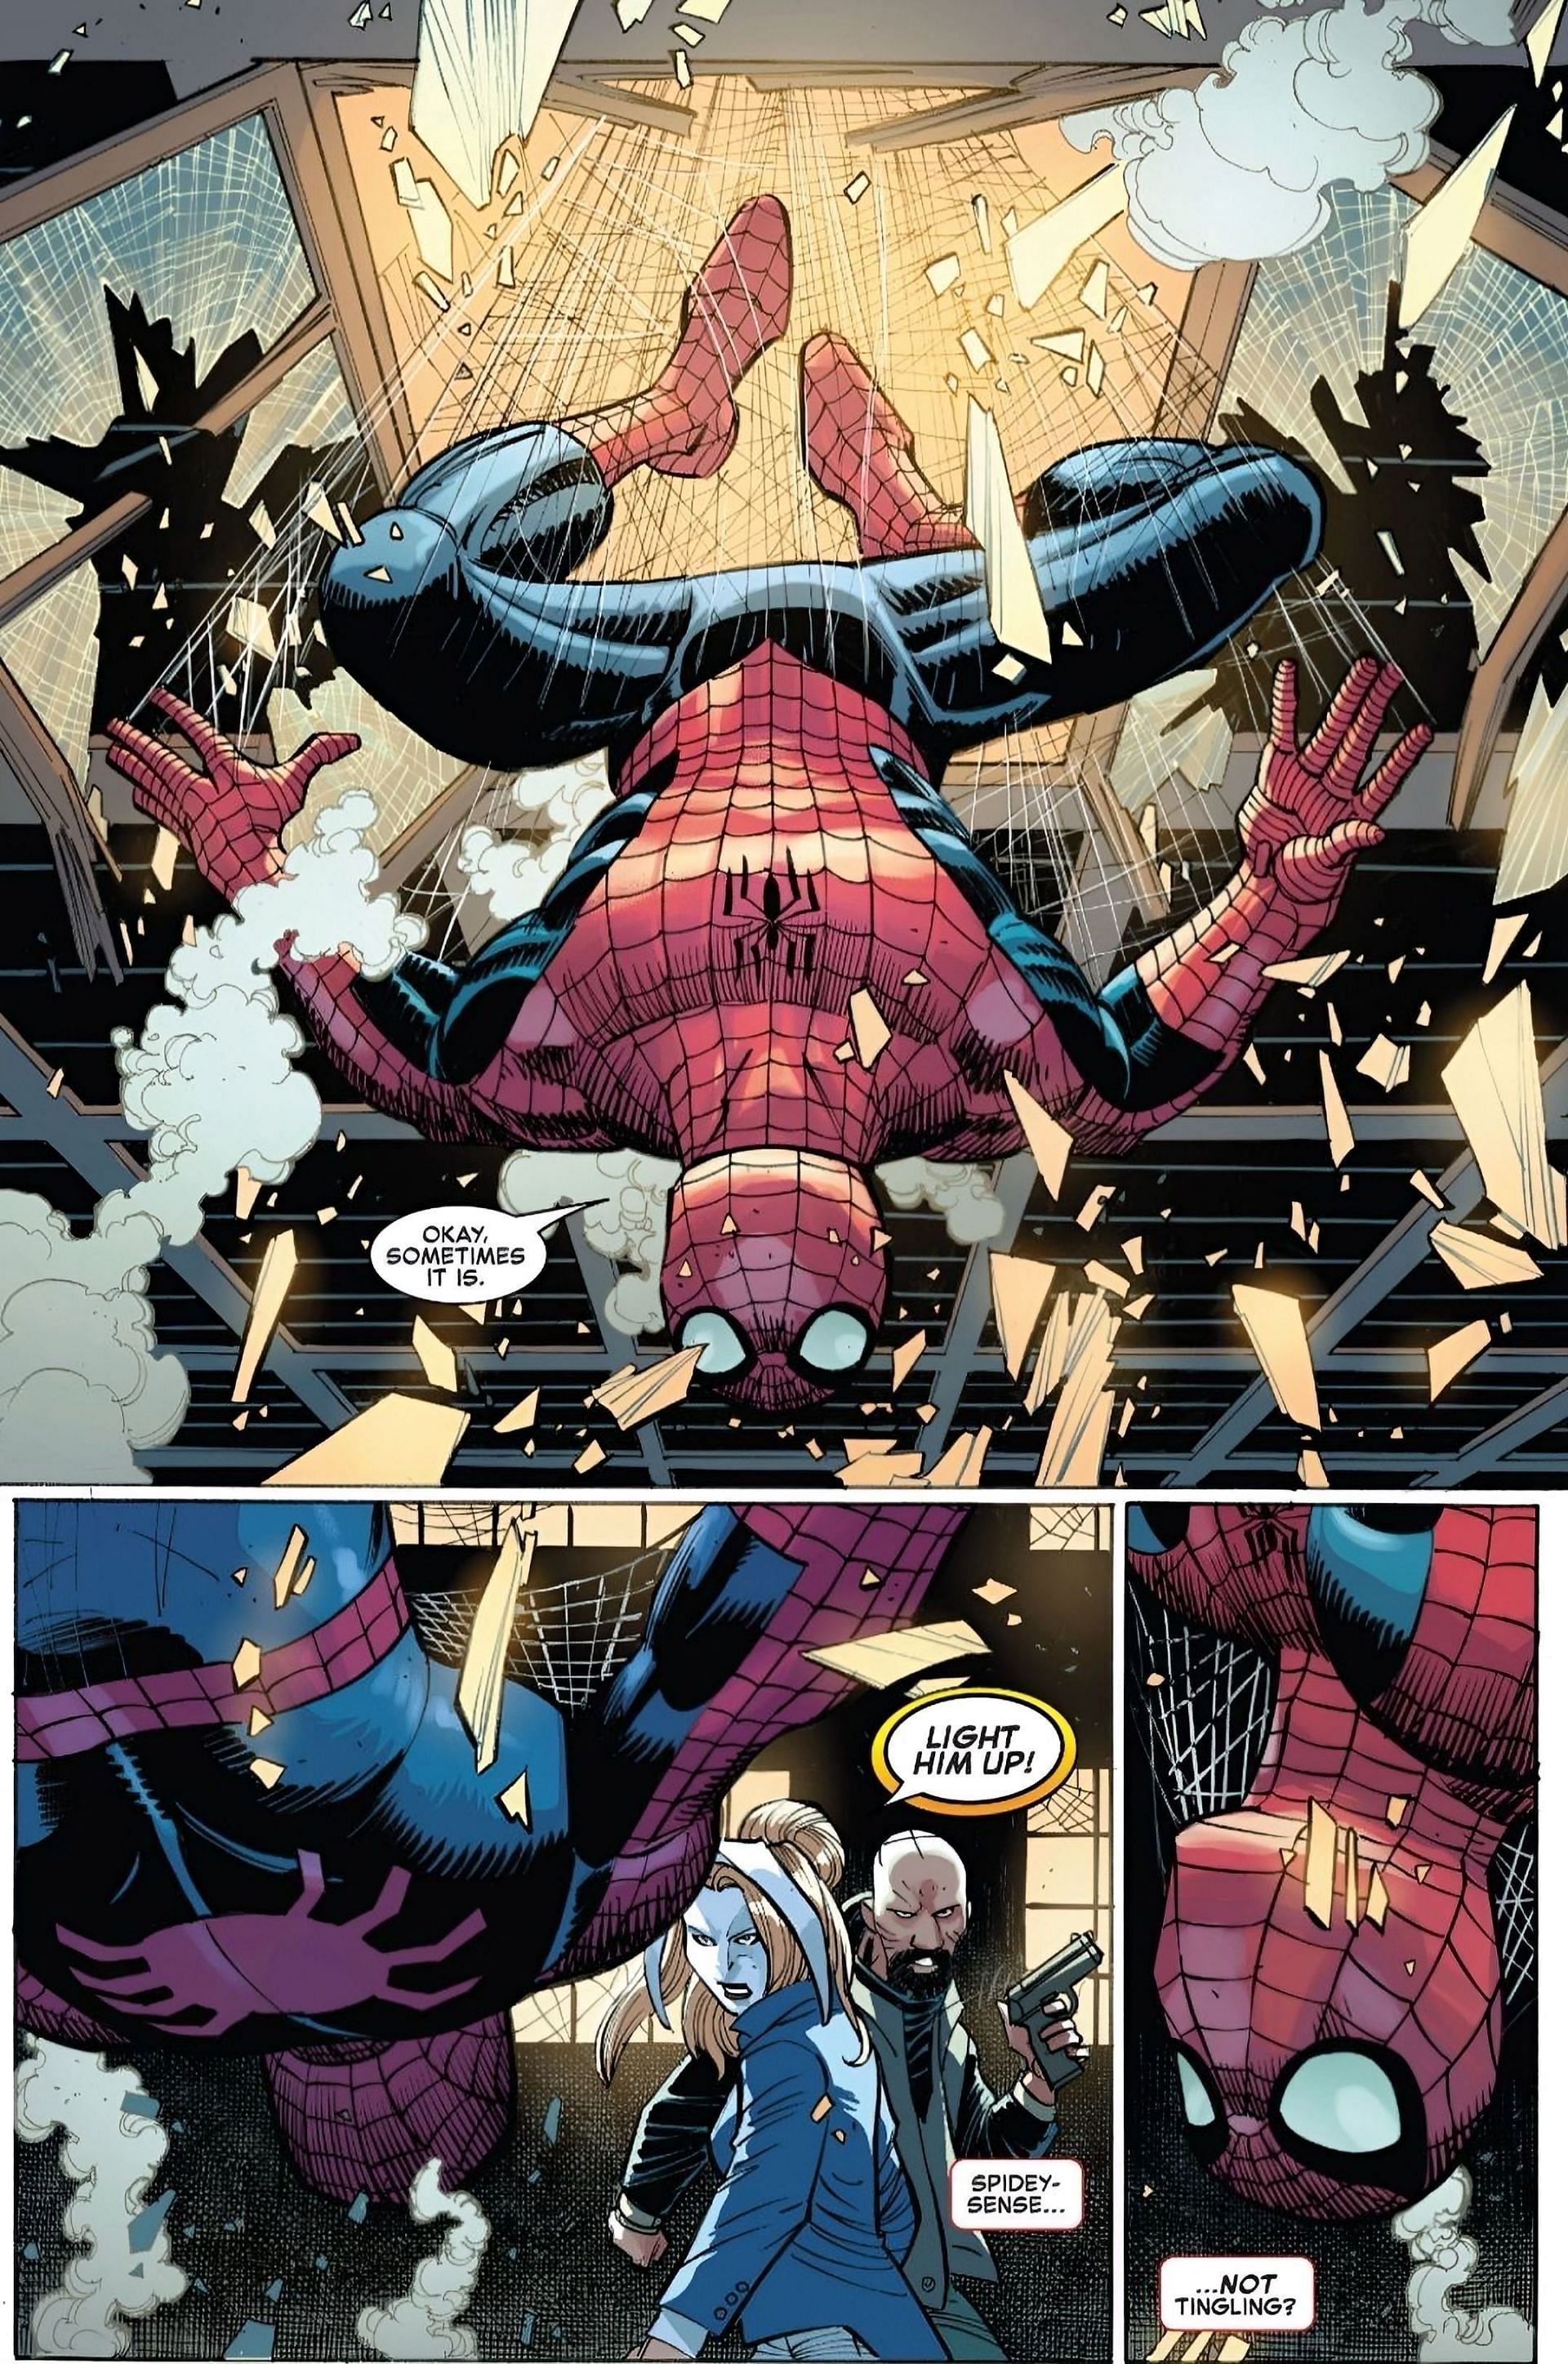 A page from comic (Image via Marvel Comics)